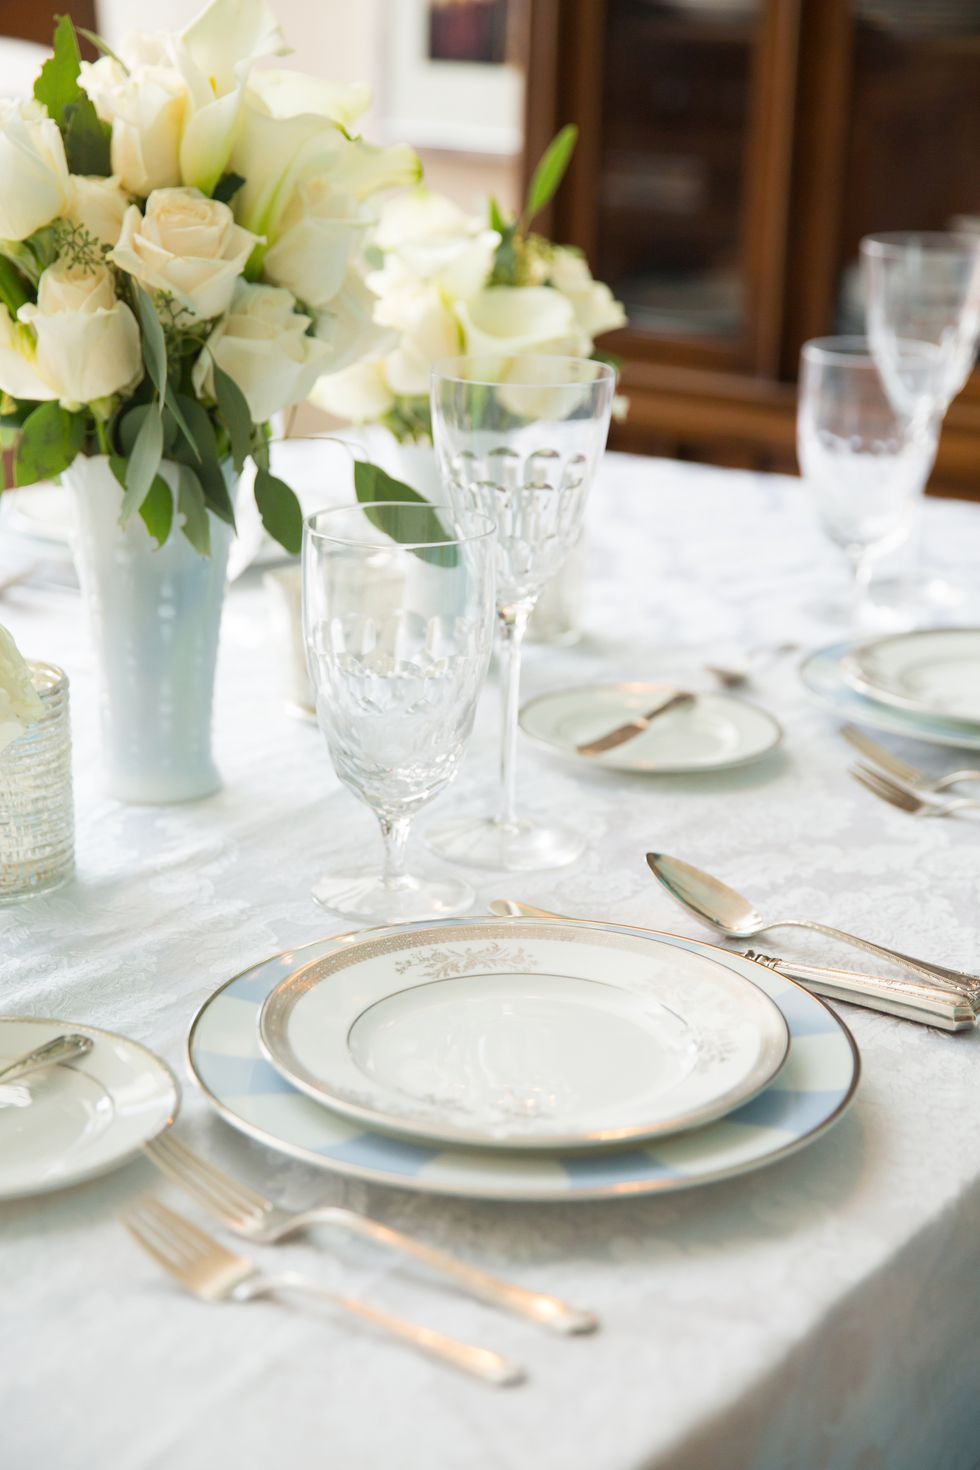 White, Table, Tablecloth, Flower, Centrepiece, Rehearsal dinner, Room, Dishware, Tableware, Textile, 